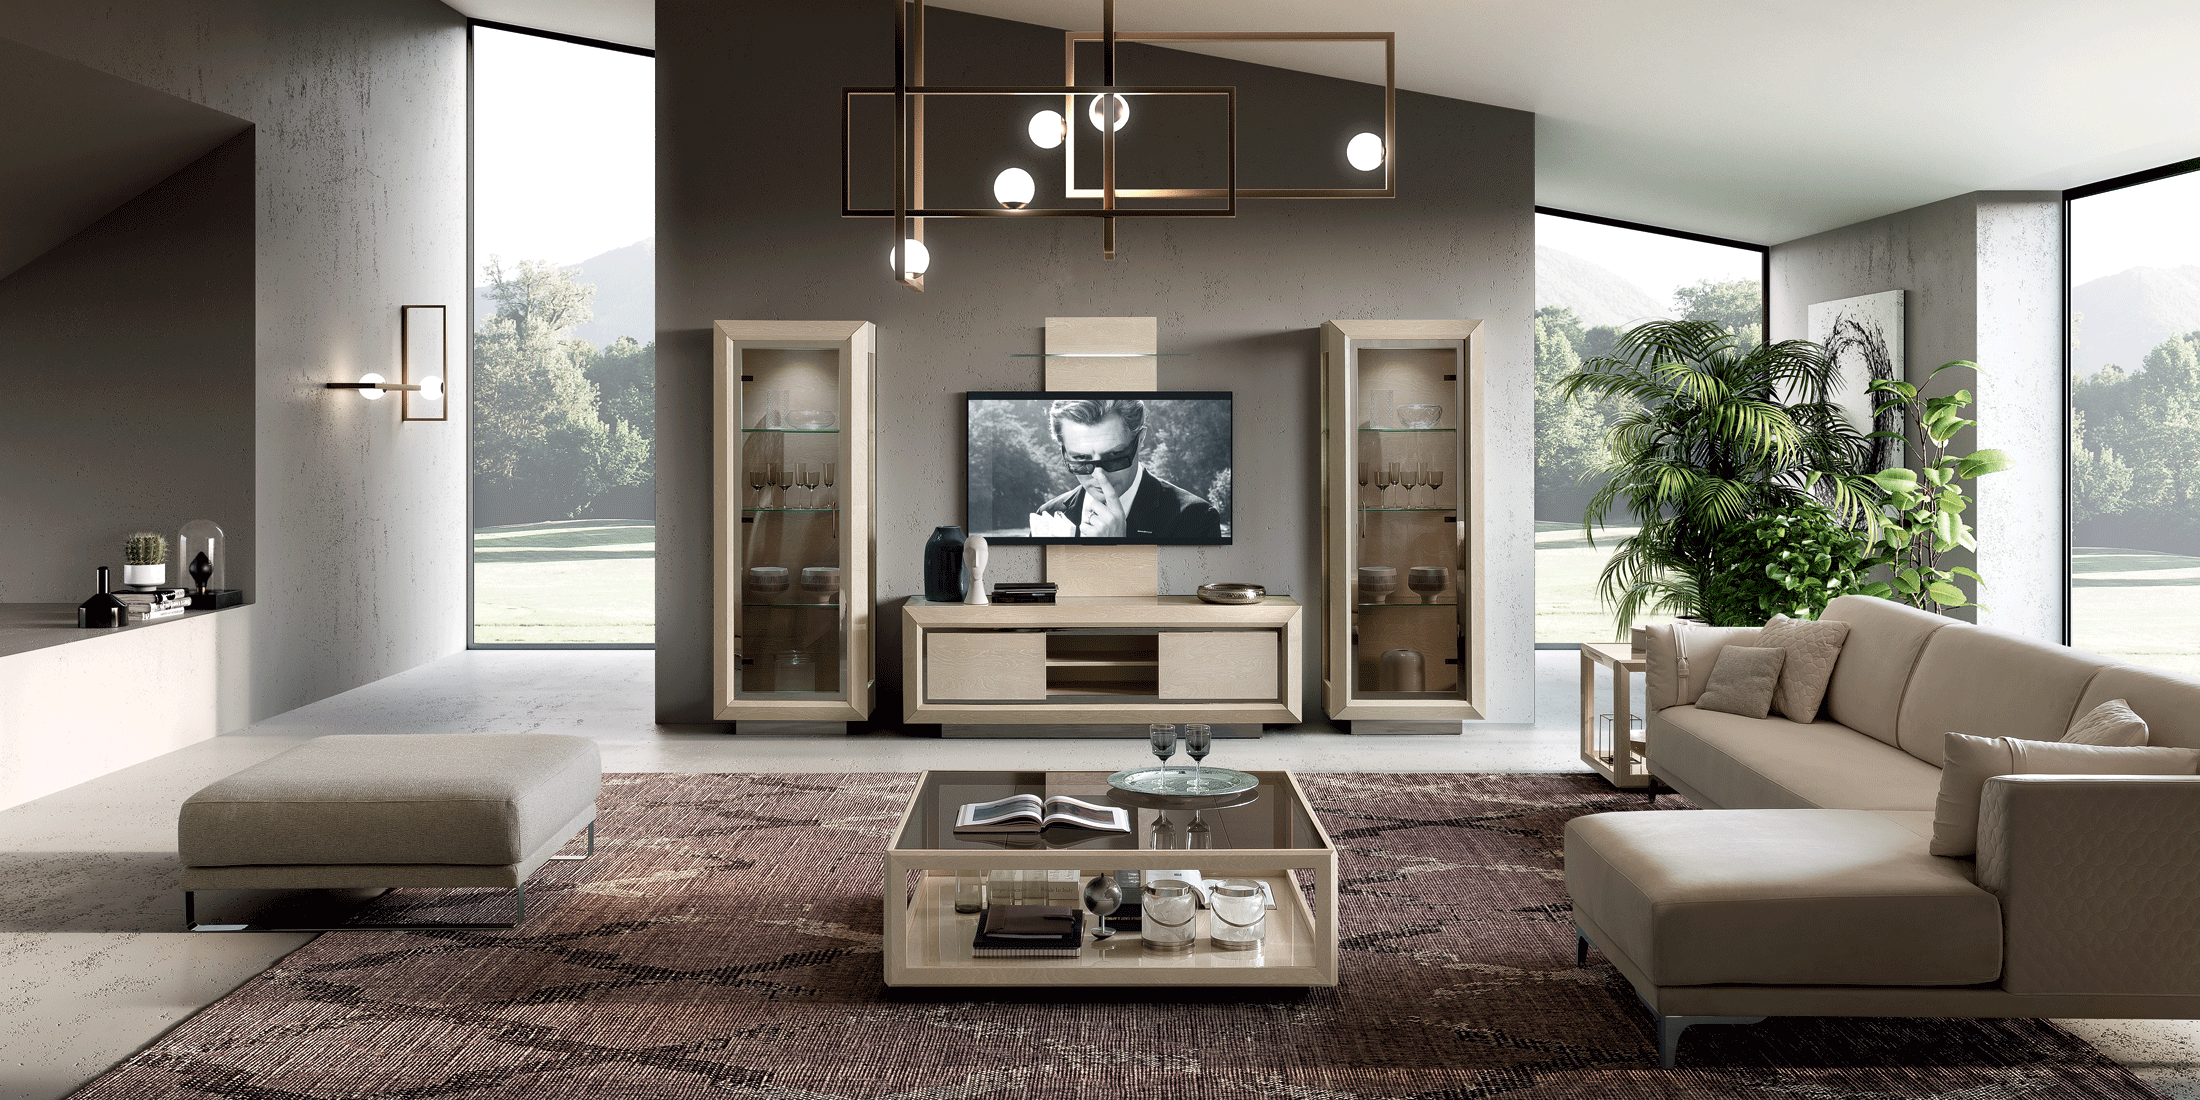 Brands MSC Modern Wall Unit, Italy Elite Day Sabbia Entertainment Additional items